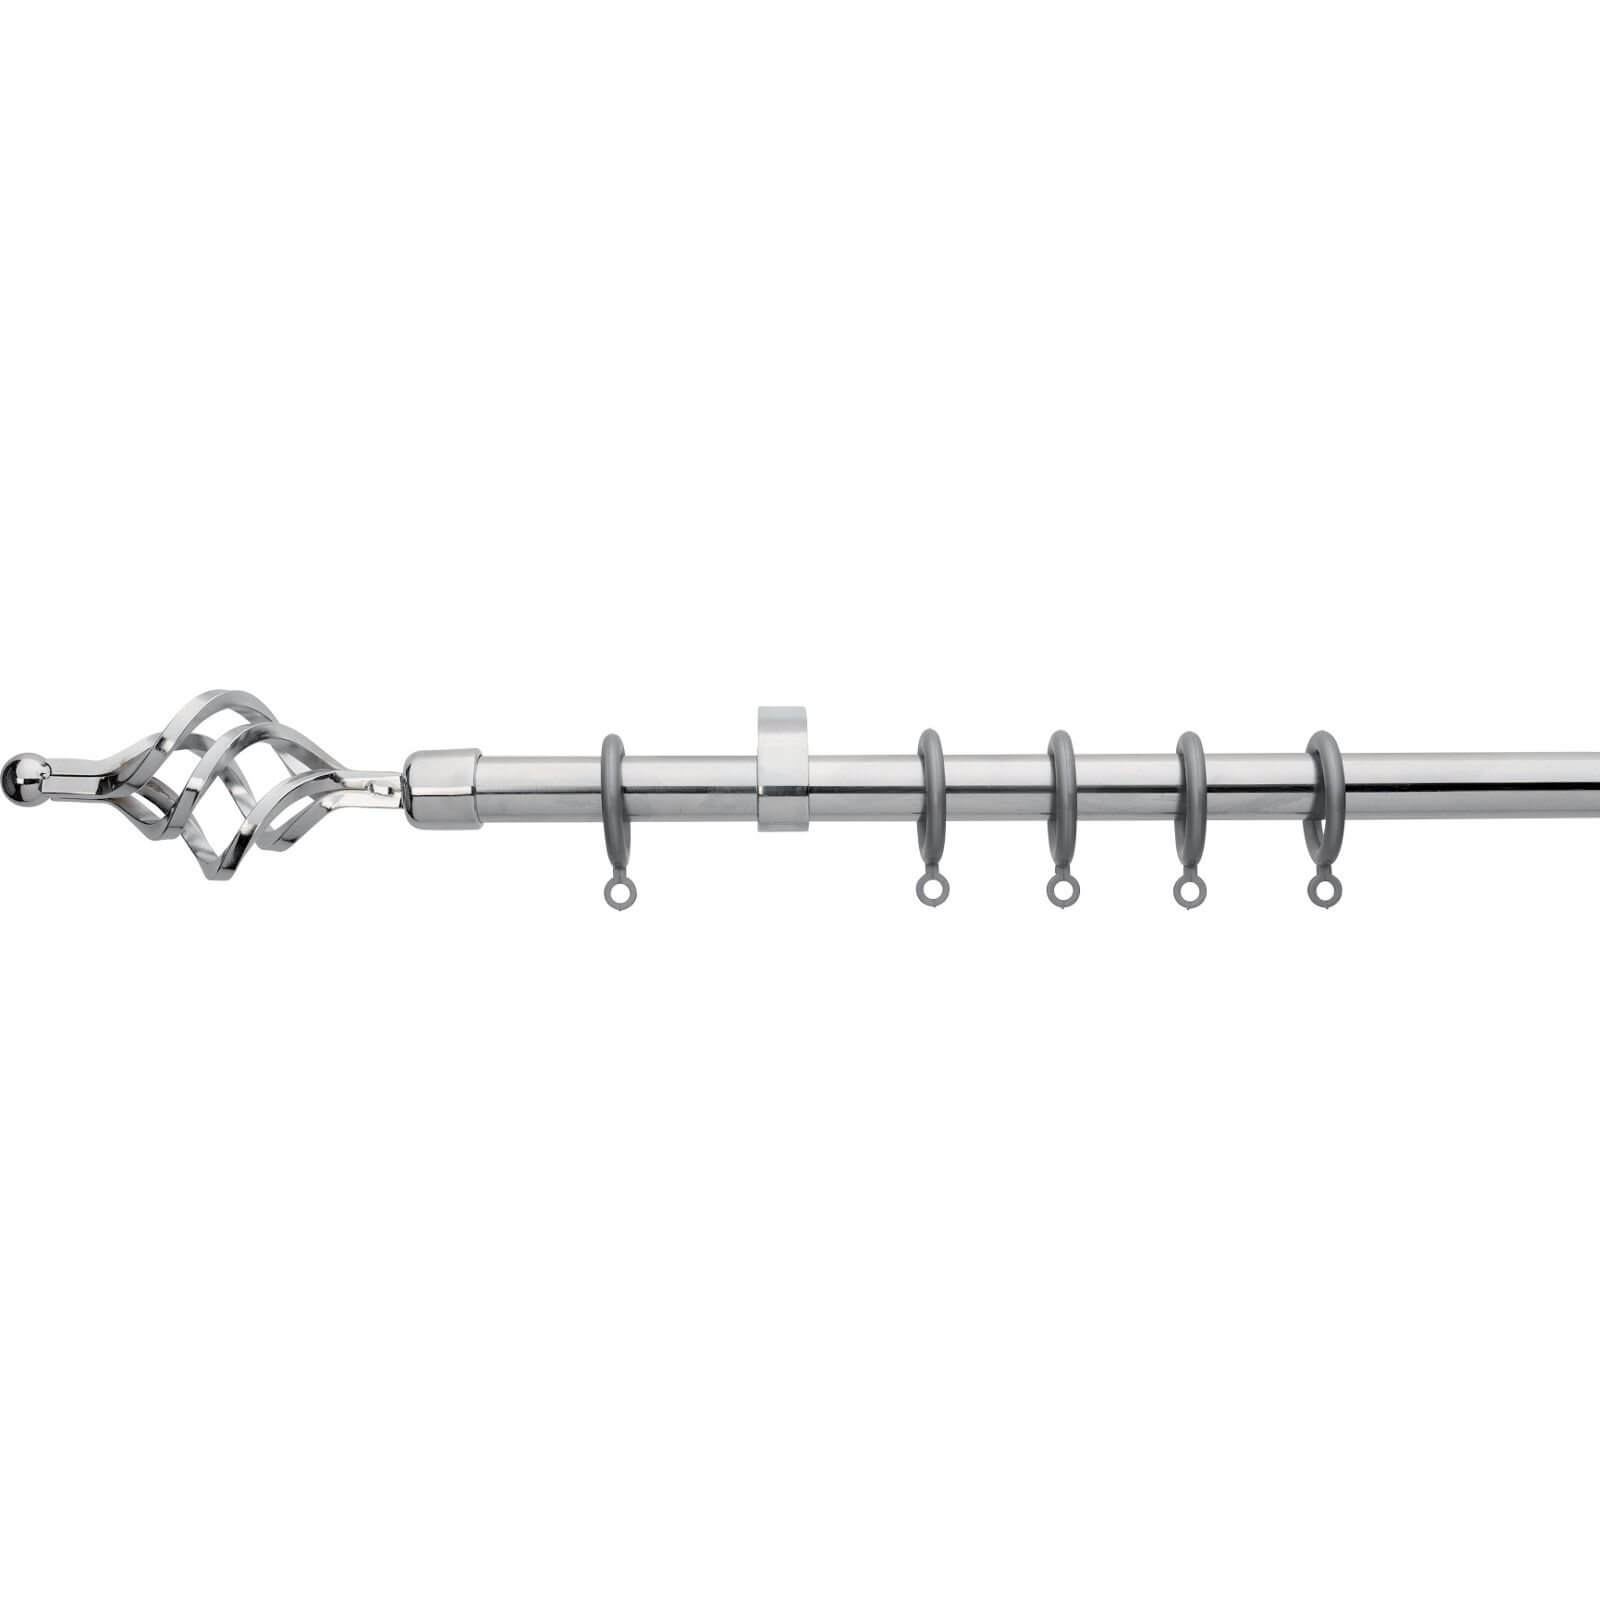 Extendable Cage Finial Curtain Pole - Chrome - 1.2-2.1m (16/19mm)